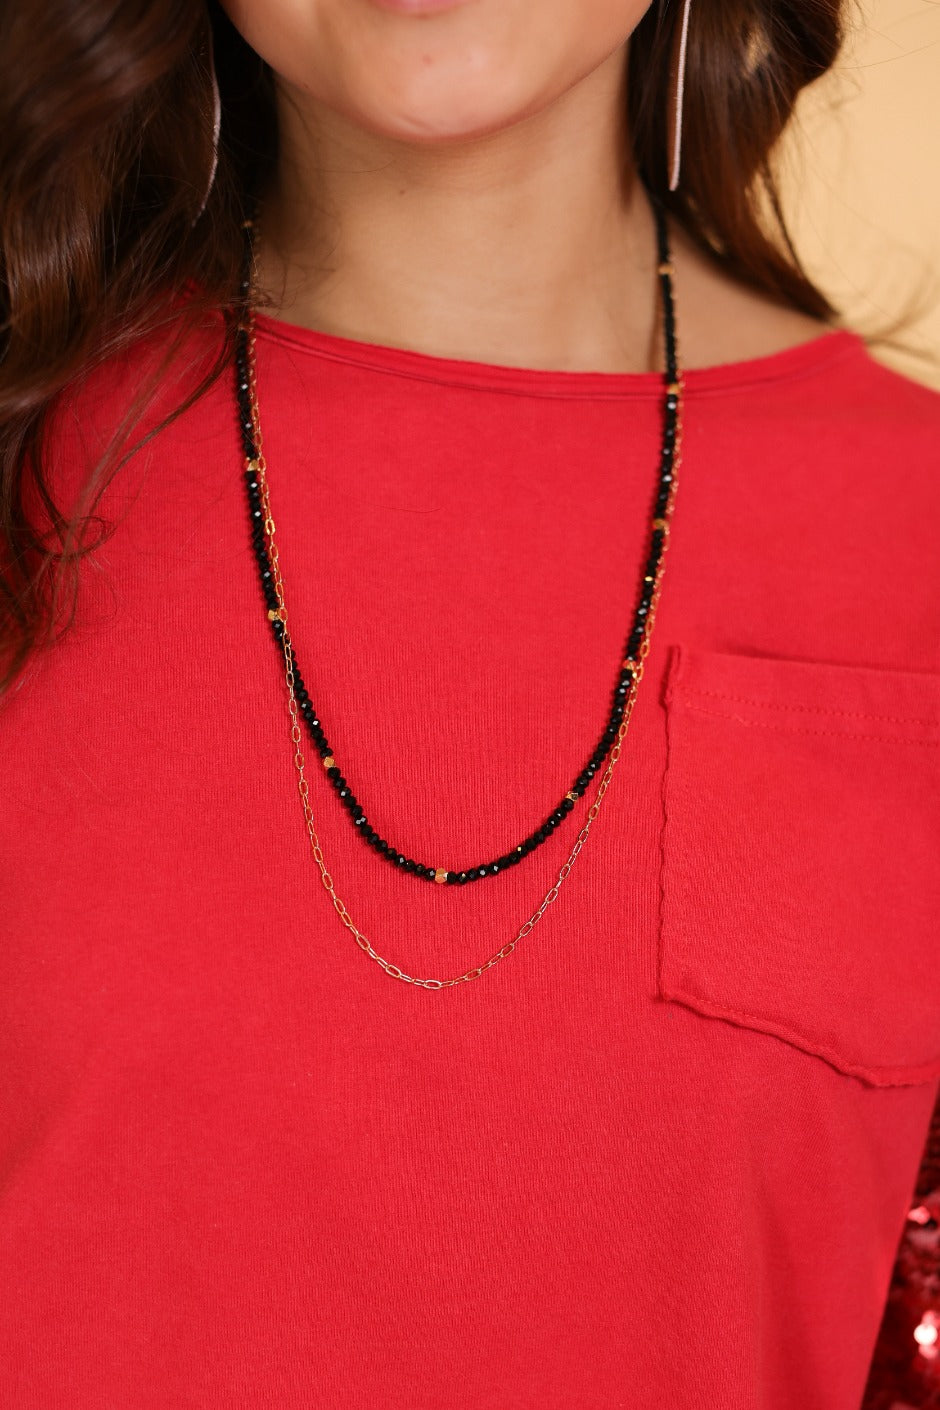 Glitz, Glam, Simple Strands Double Beaded Black Necklace with A Gold Chain